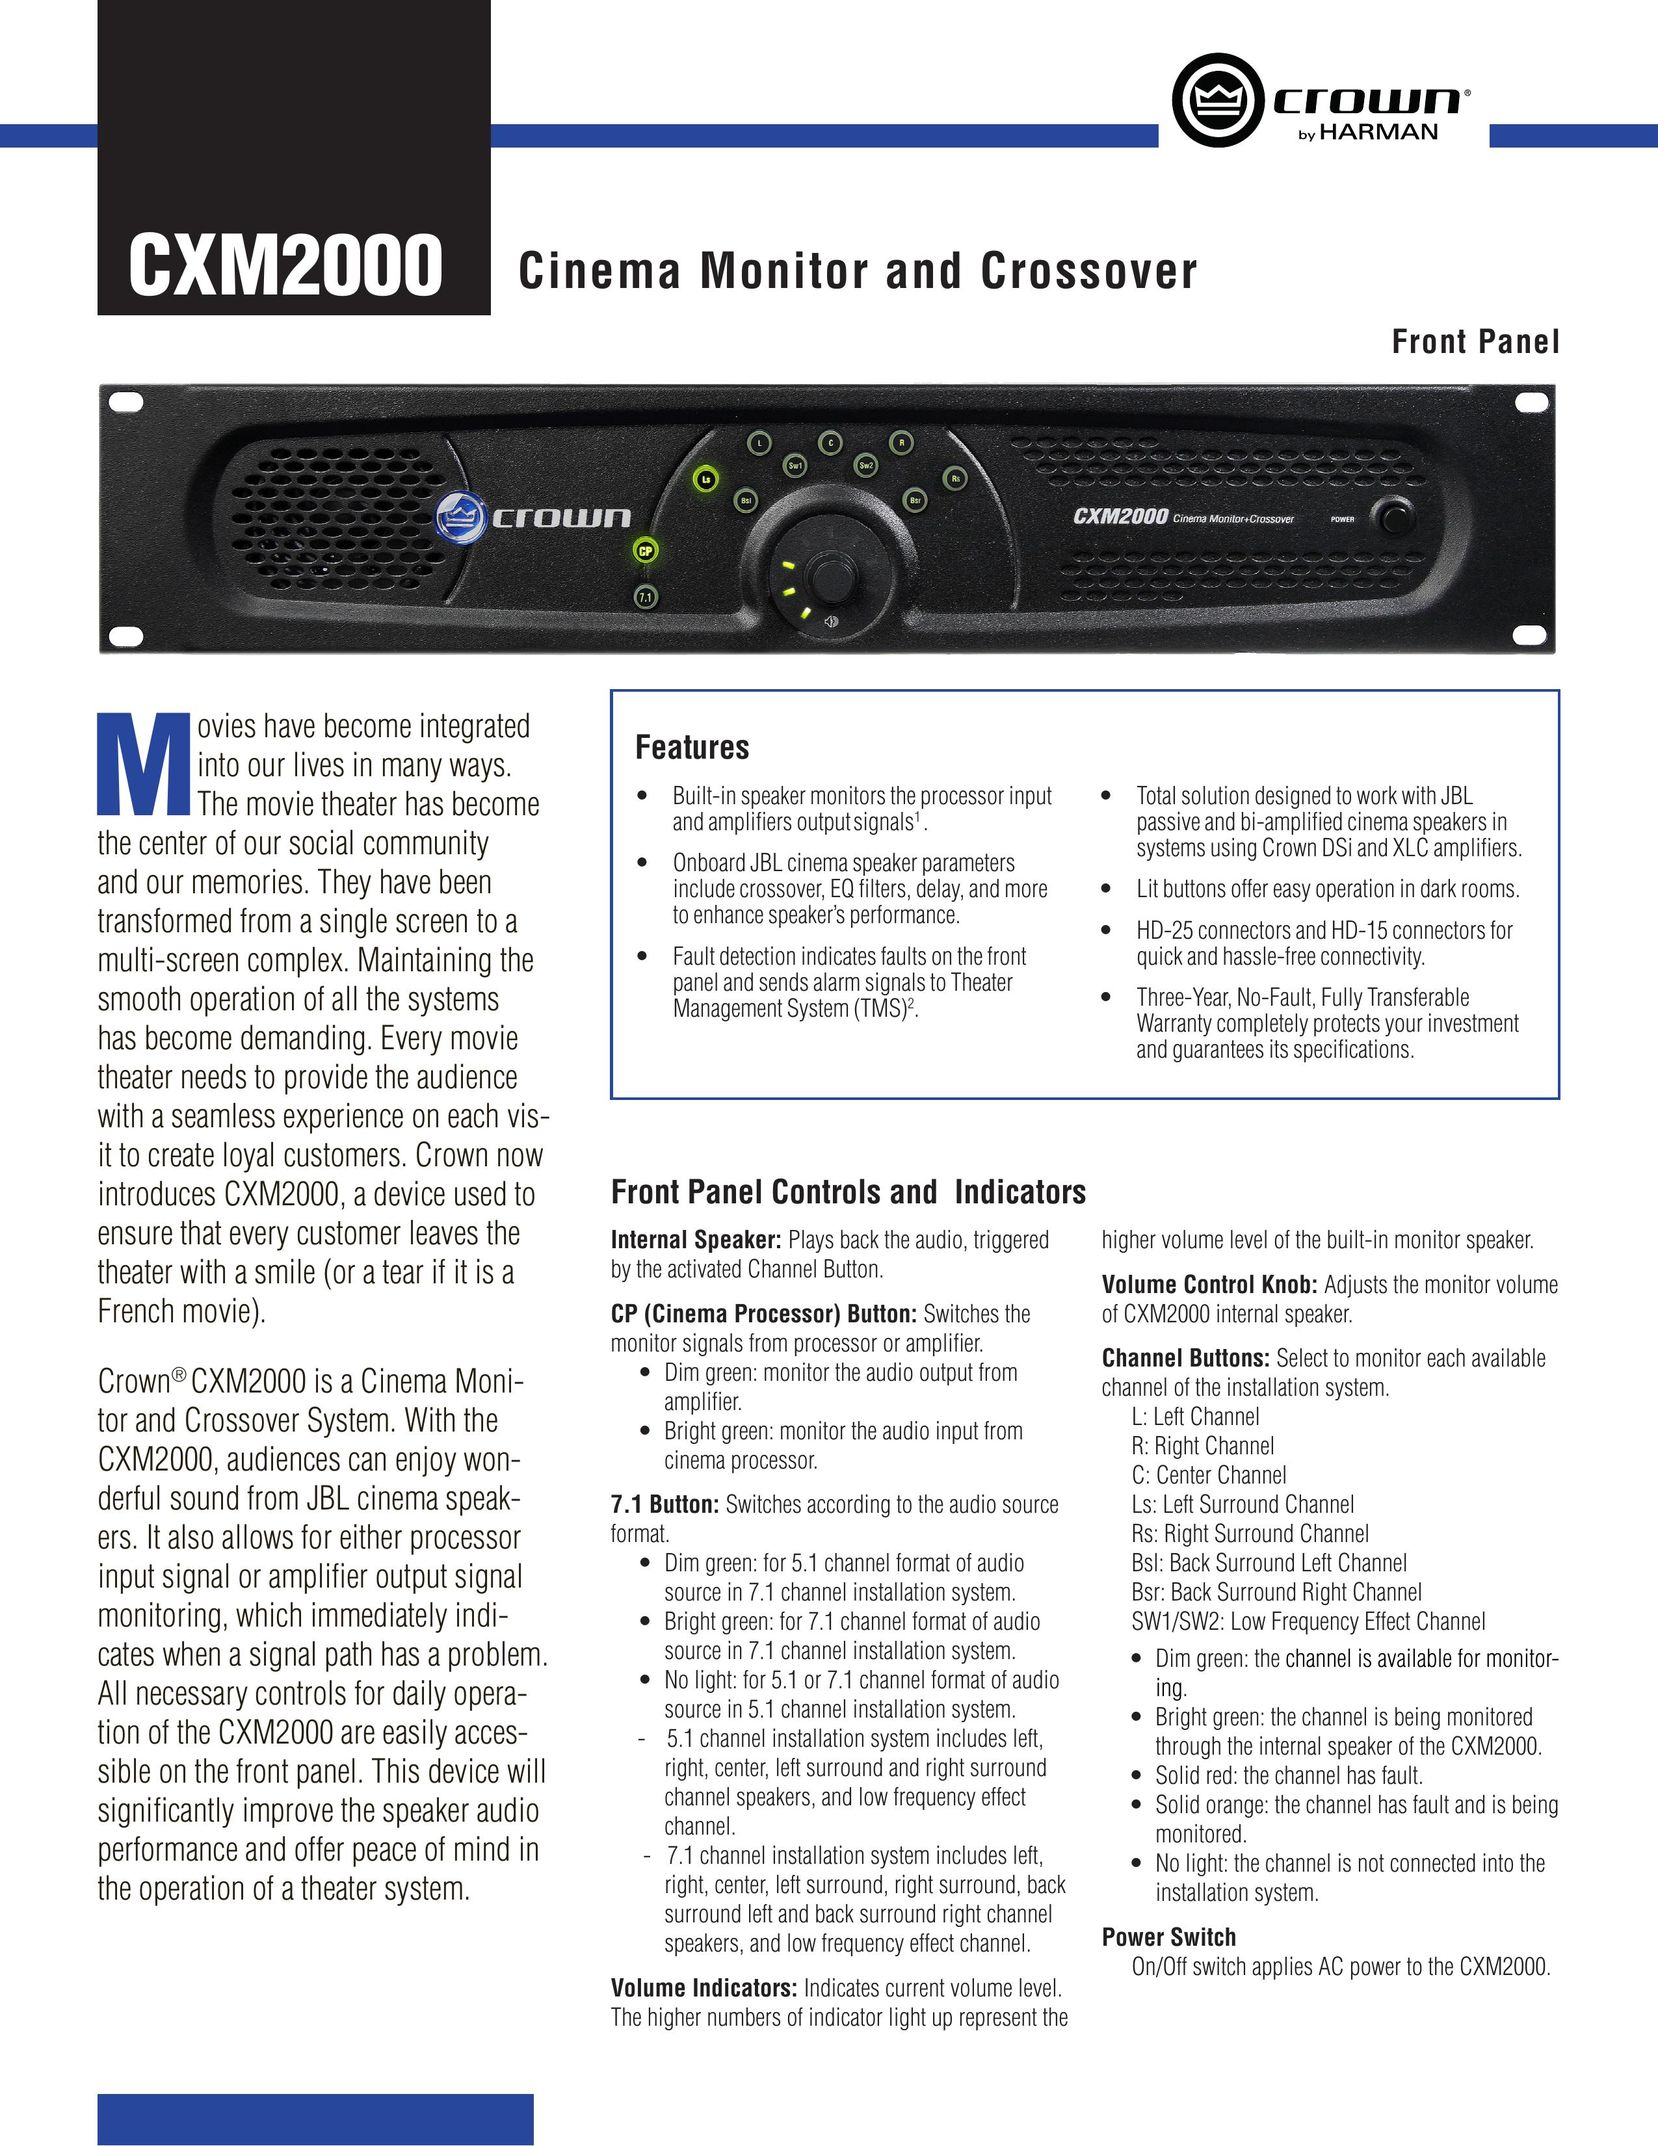 Crown CXM2000 Home Theater System User Manual